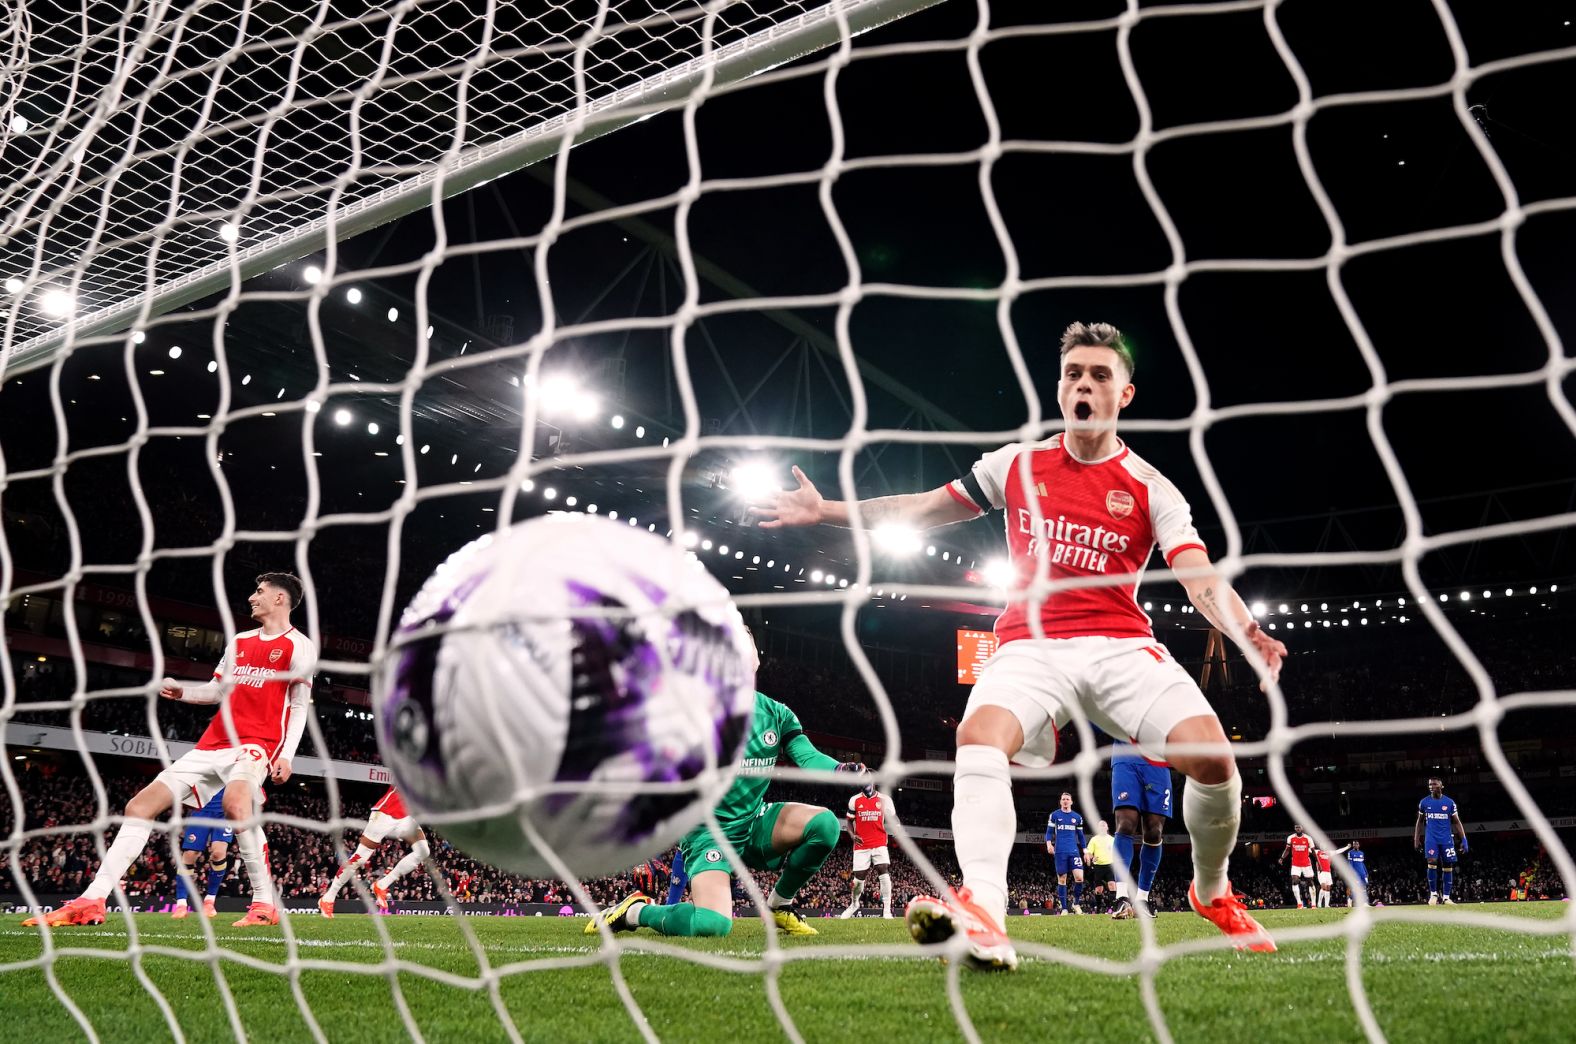 Arsenal's Leandro Trossard reacts after teammate Ben White scored the London side's fifth goal of the game during a 5-0 Premier League victory against Chelsea on Tuesday, April 23.